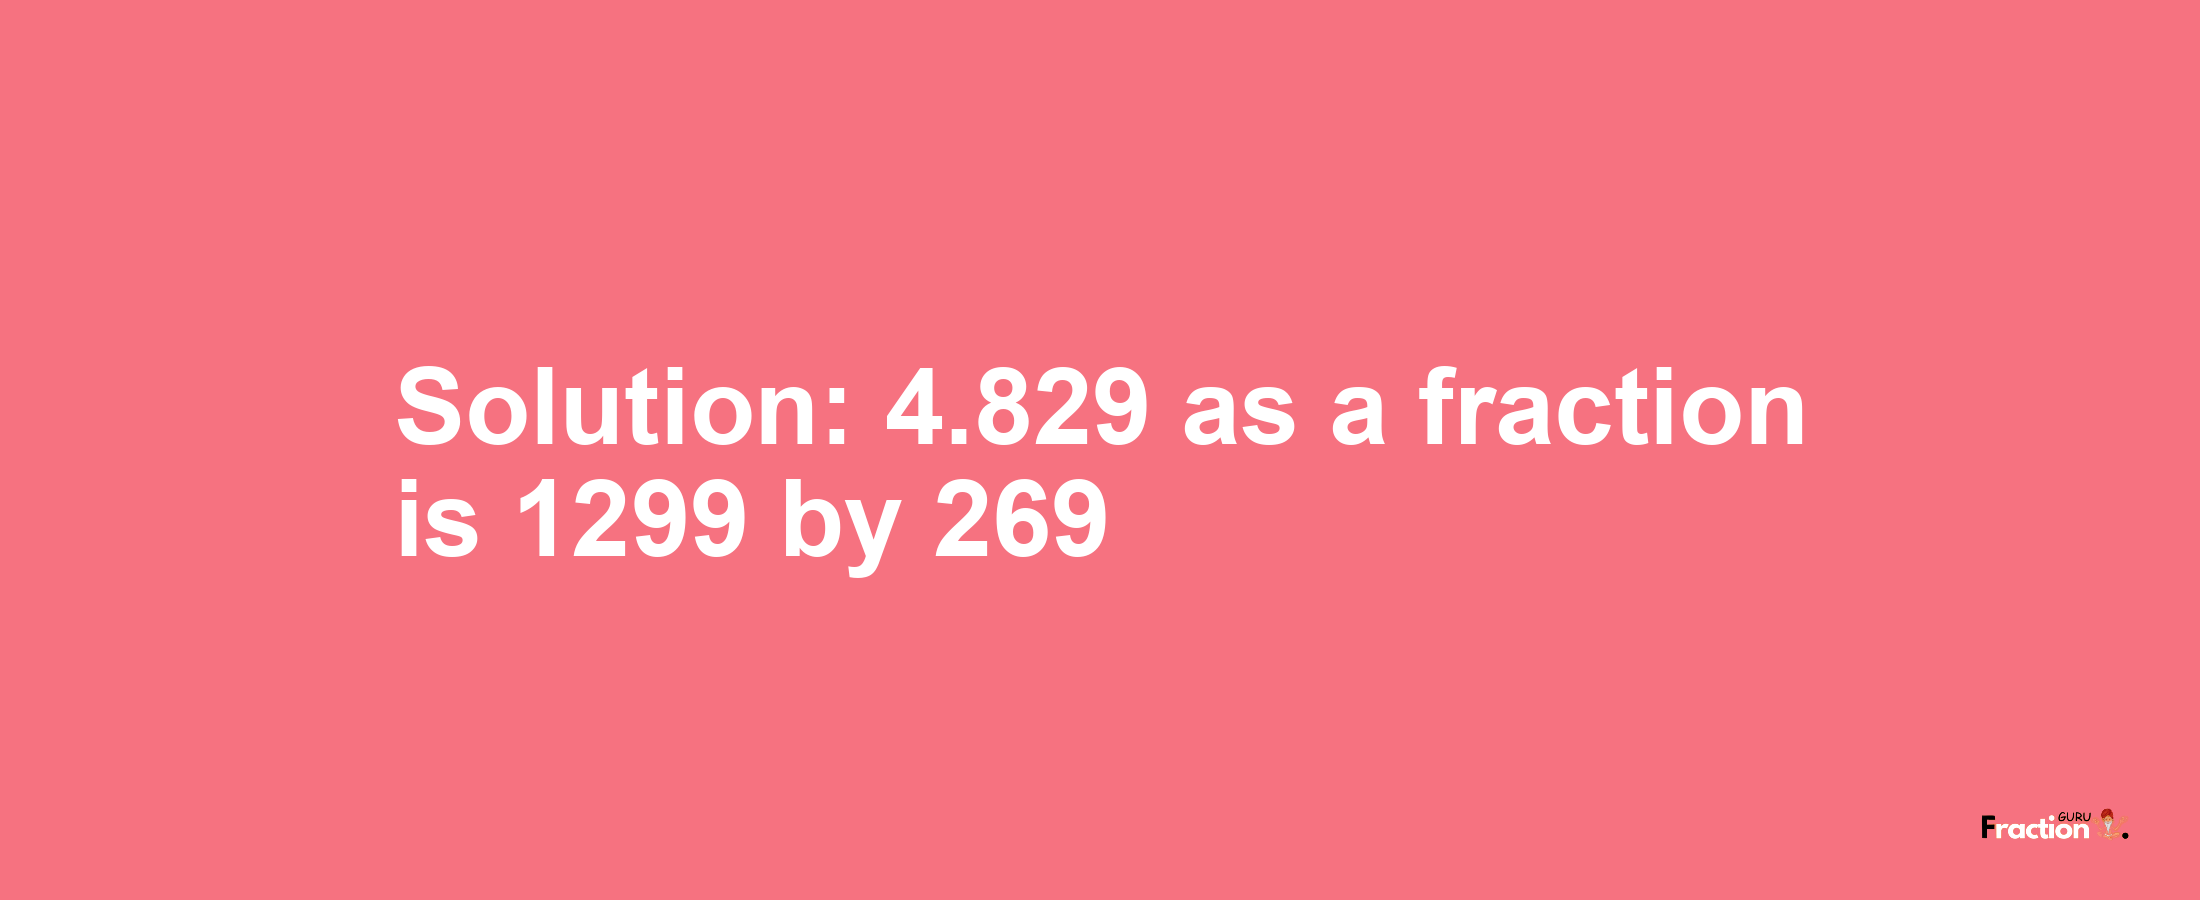 Solution:4.829 as a fraction is 1299/269